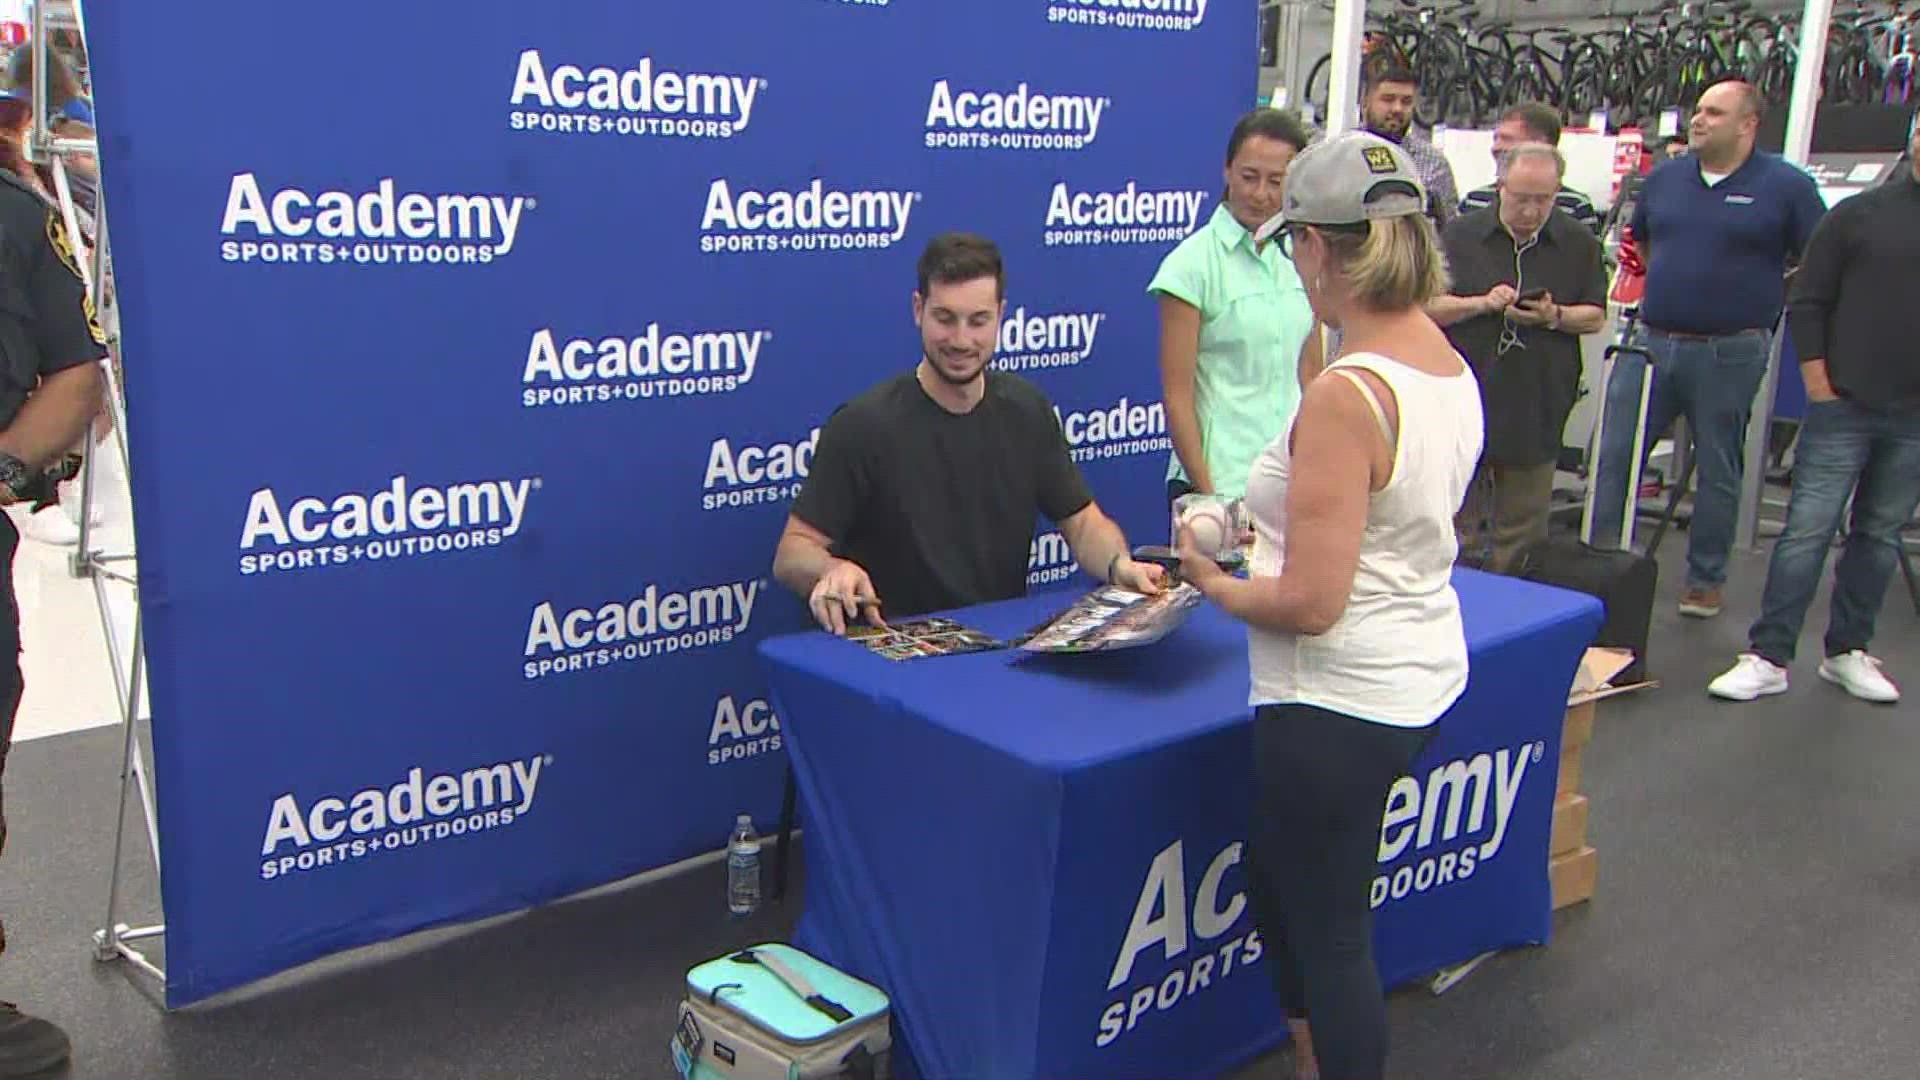 Astros fans show up at Bunker Hill Academy to meet Kyle Tucker